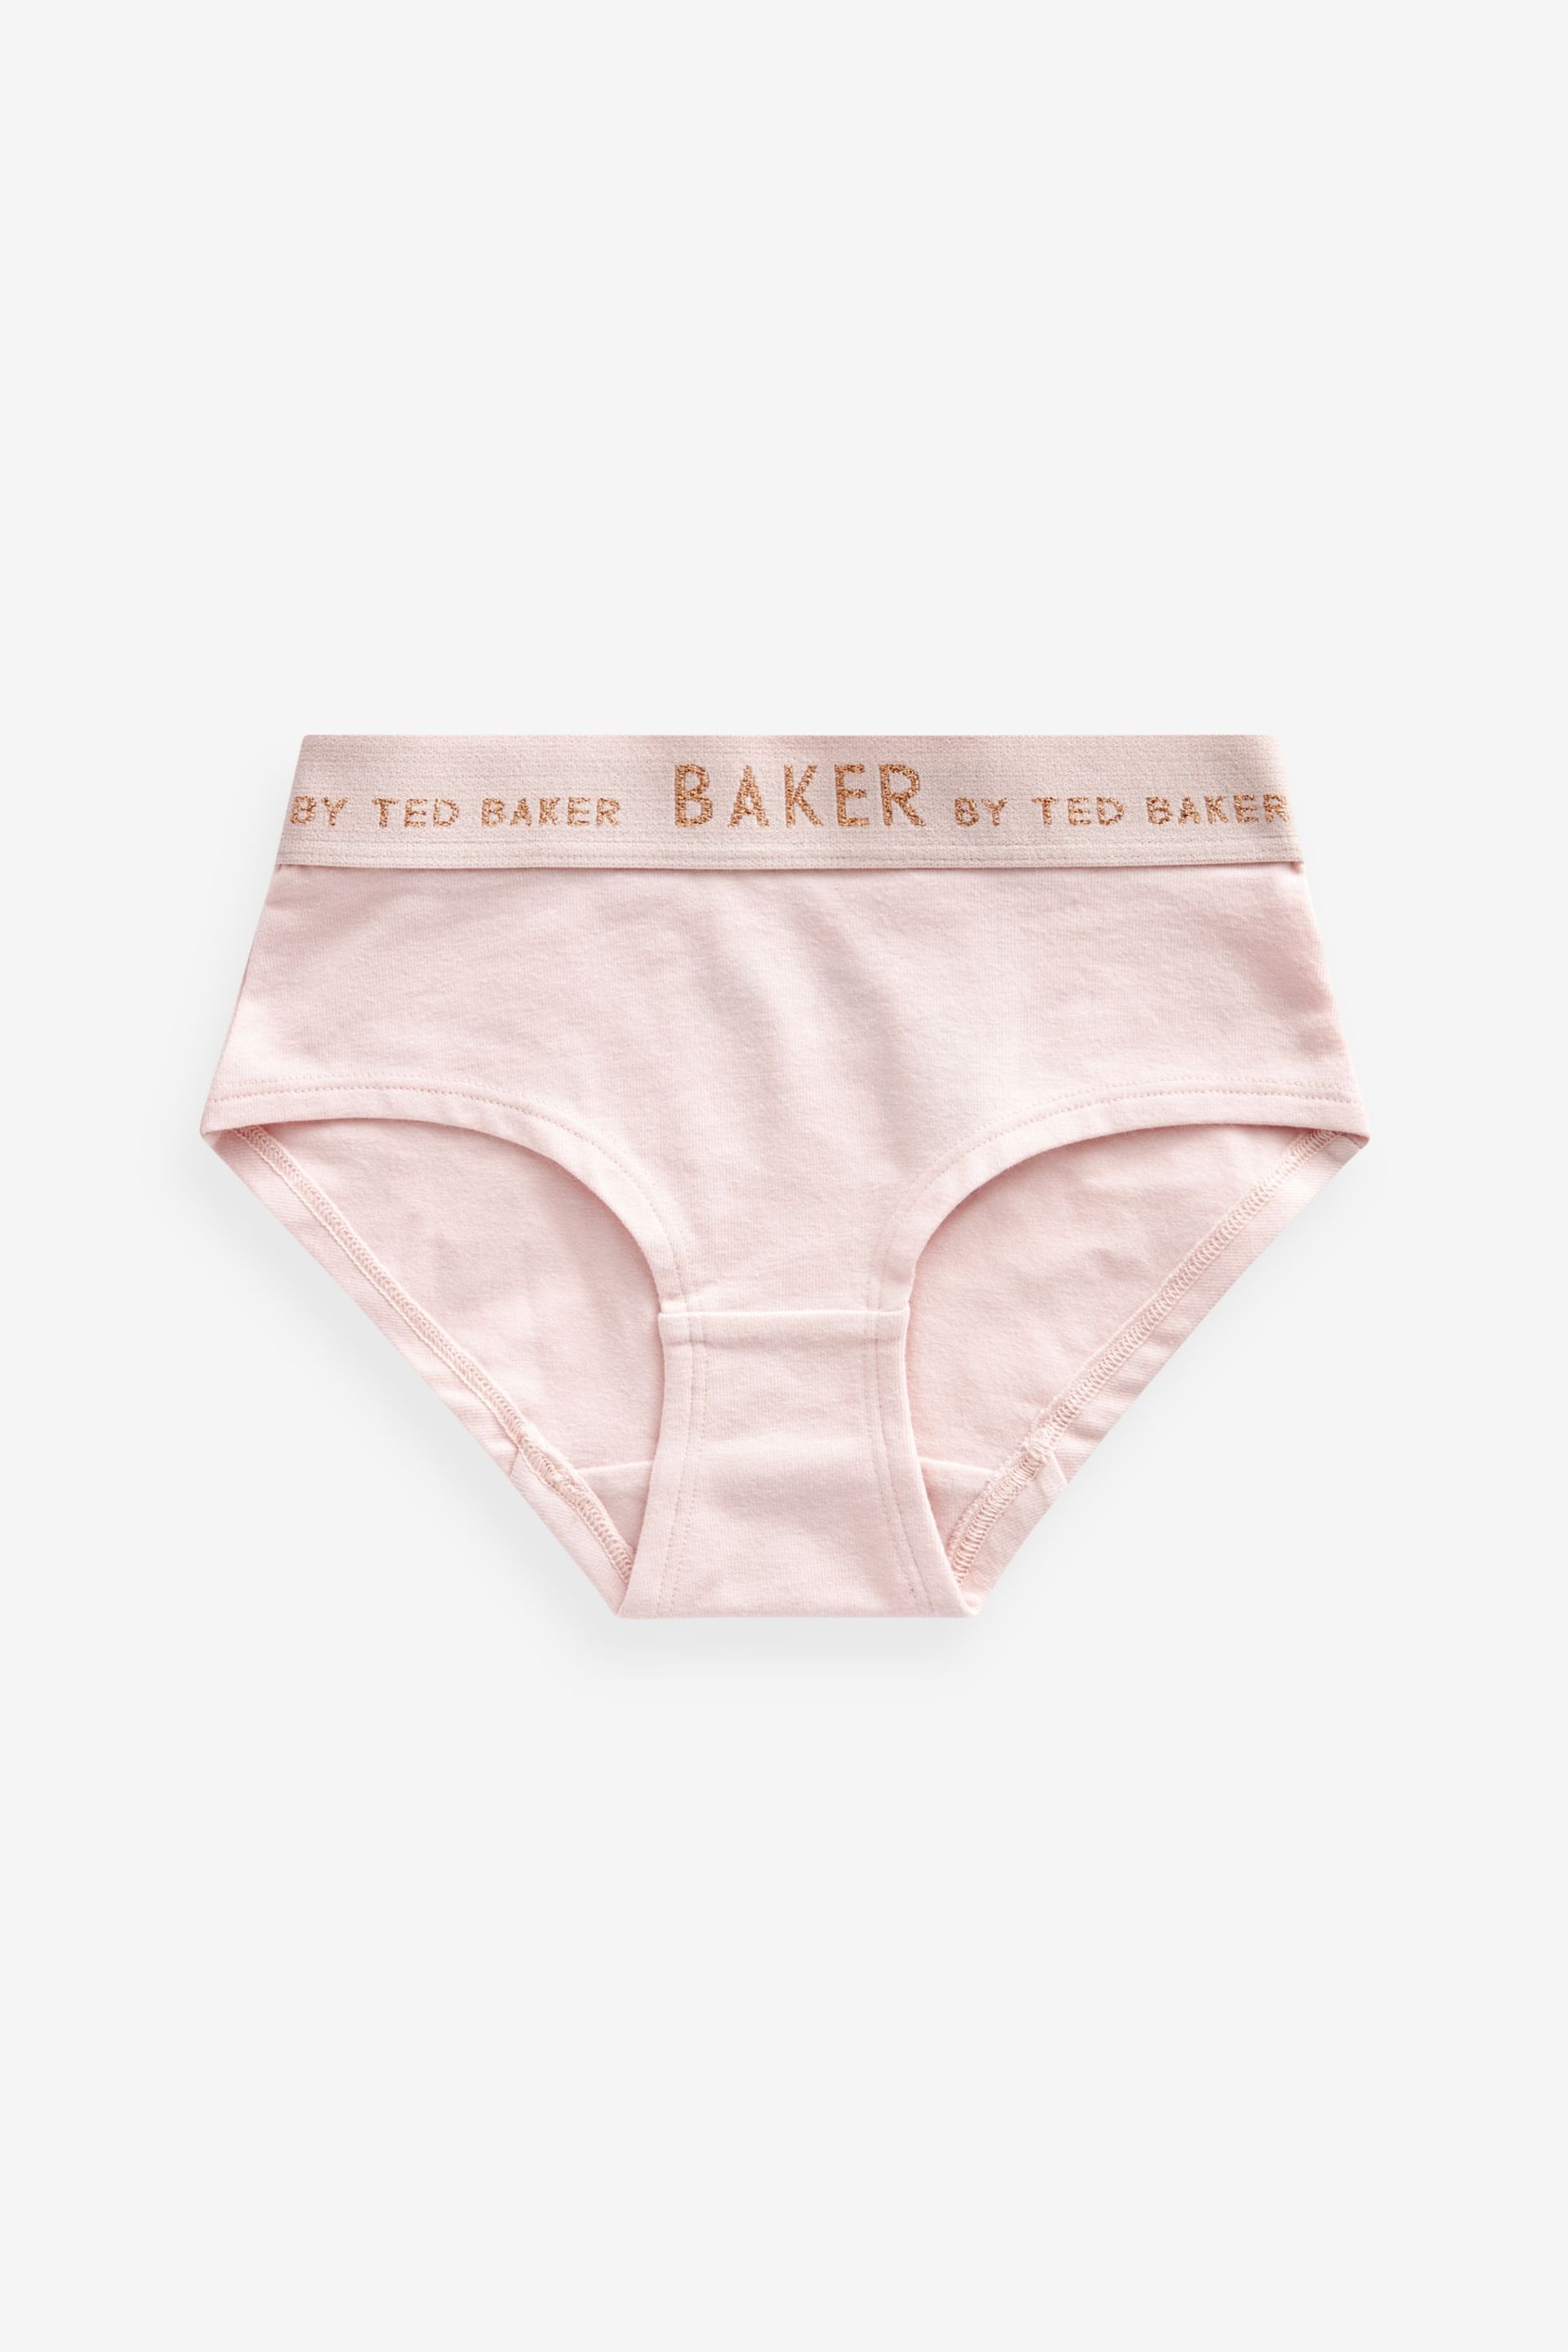 Baker by Ted Baker Briefs 3 Pack - Image 2 of 6